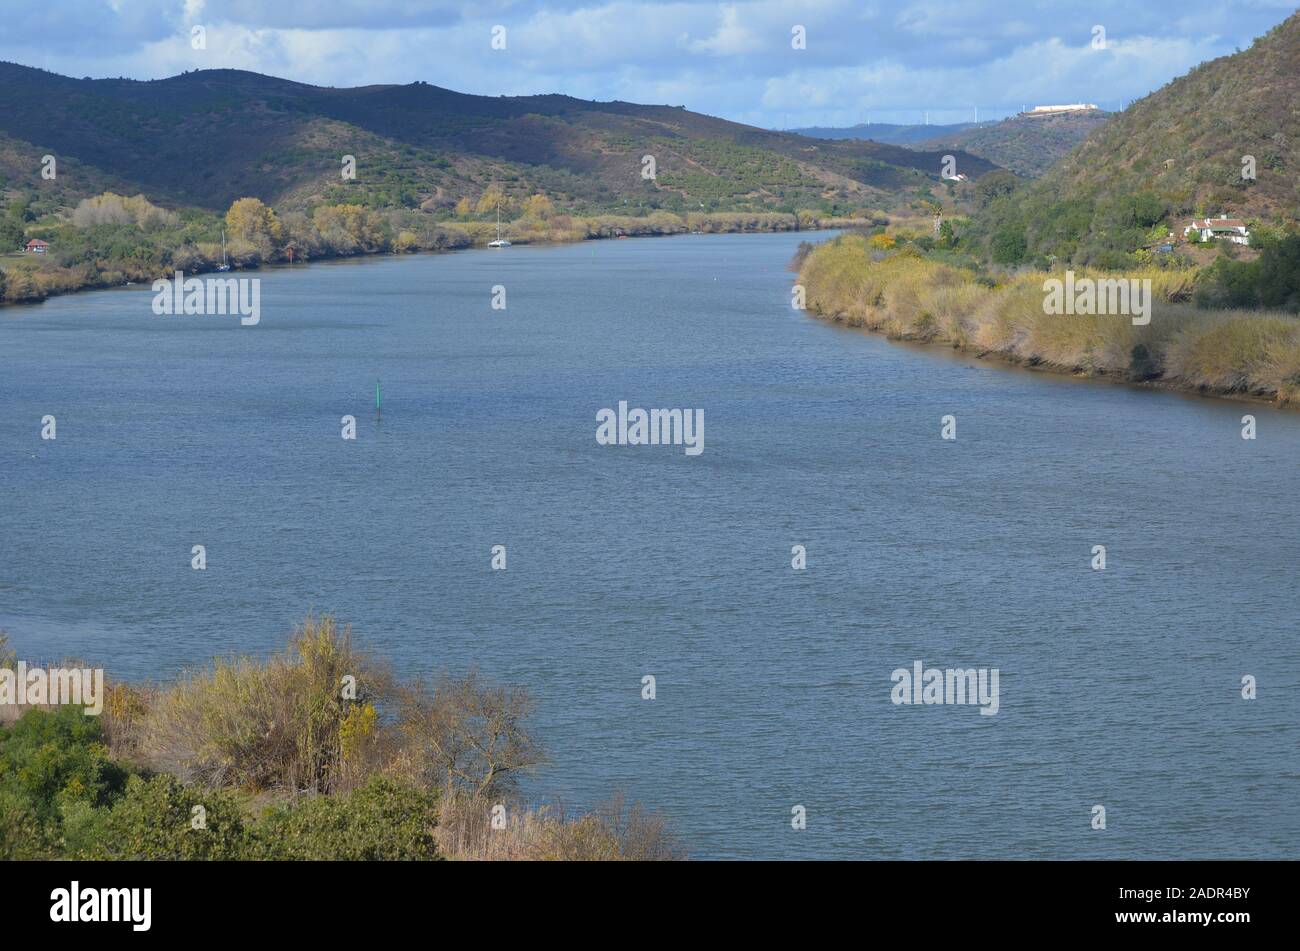 The lower Guadiana valley (at the border between Portugal and Spain), a mosaic ecosystem encompassing estuarine waters, small scale orchards, riverine Stock Photo